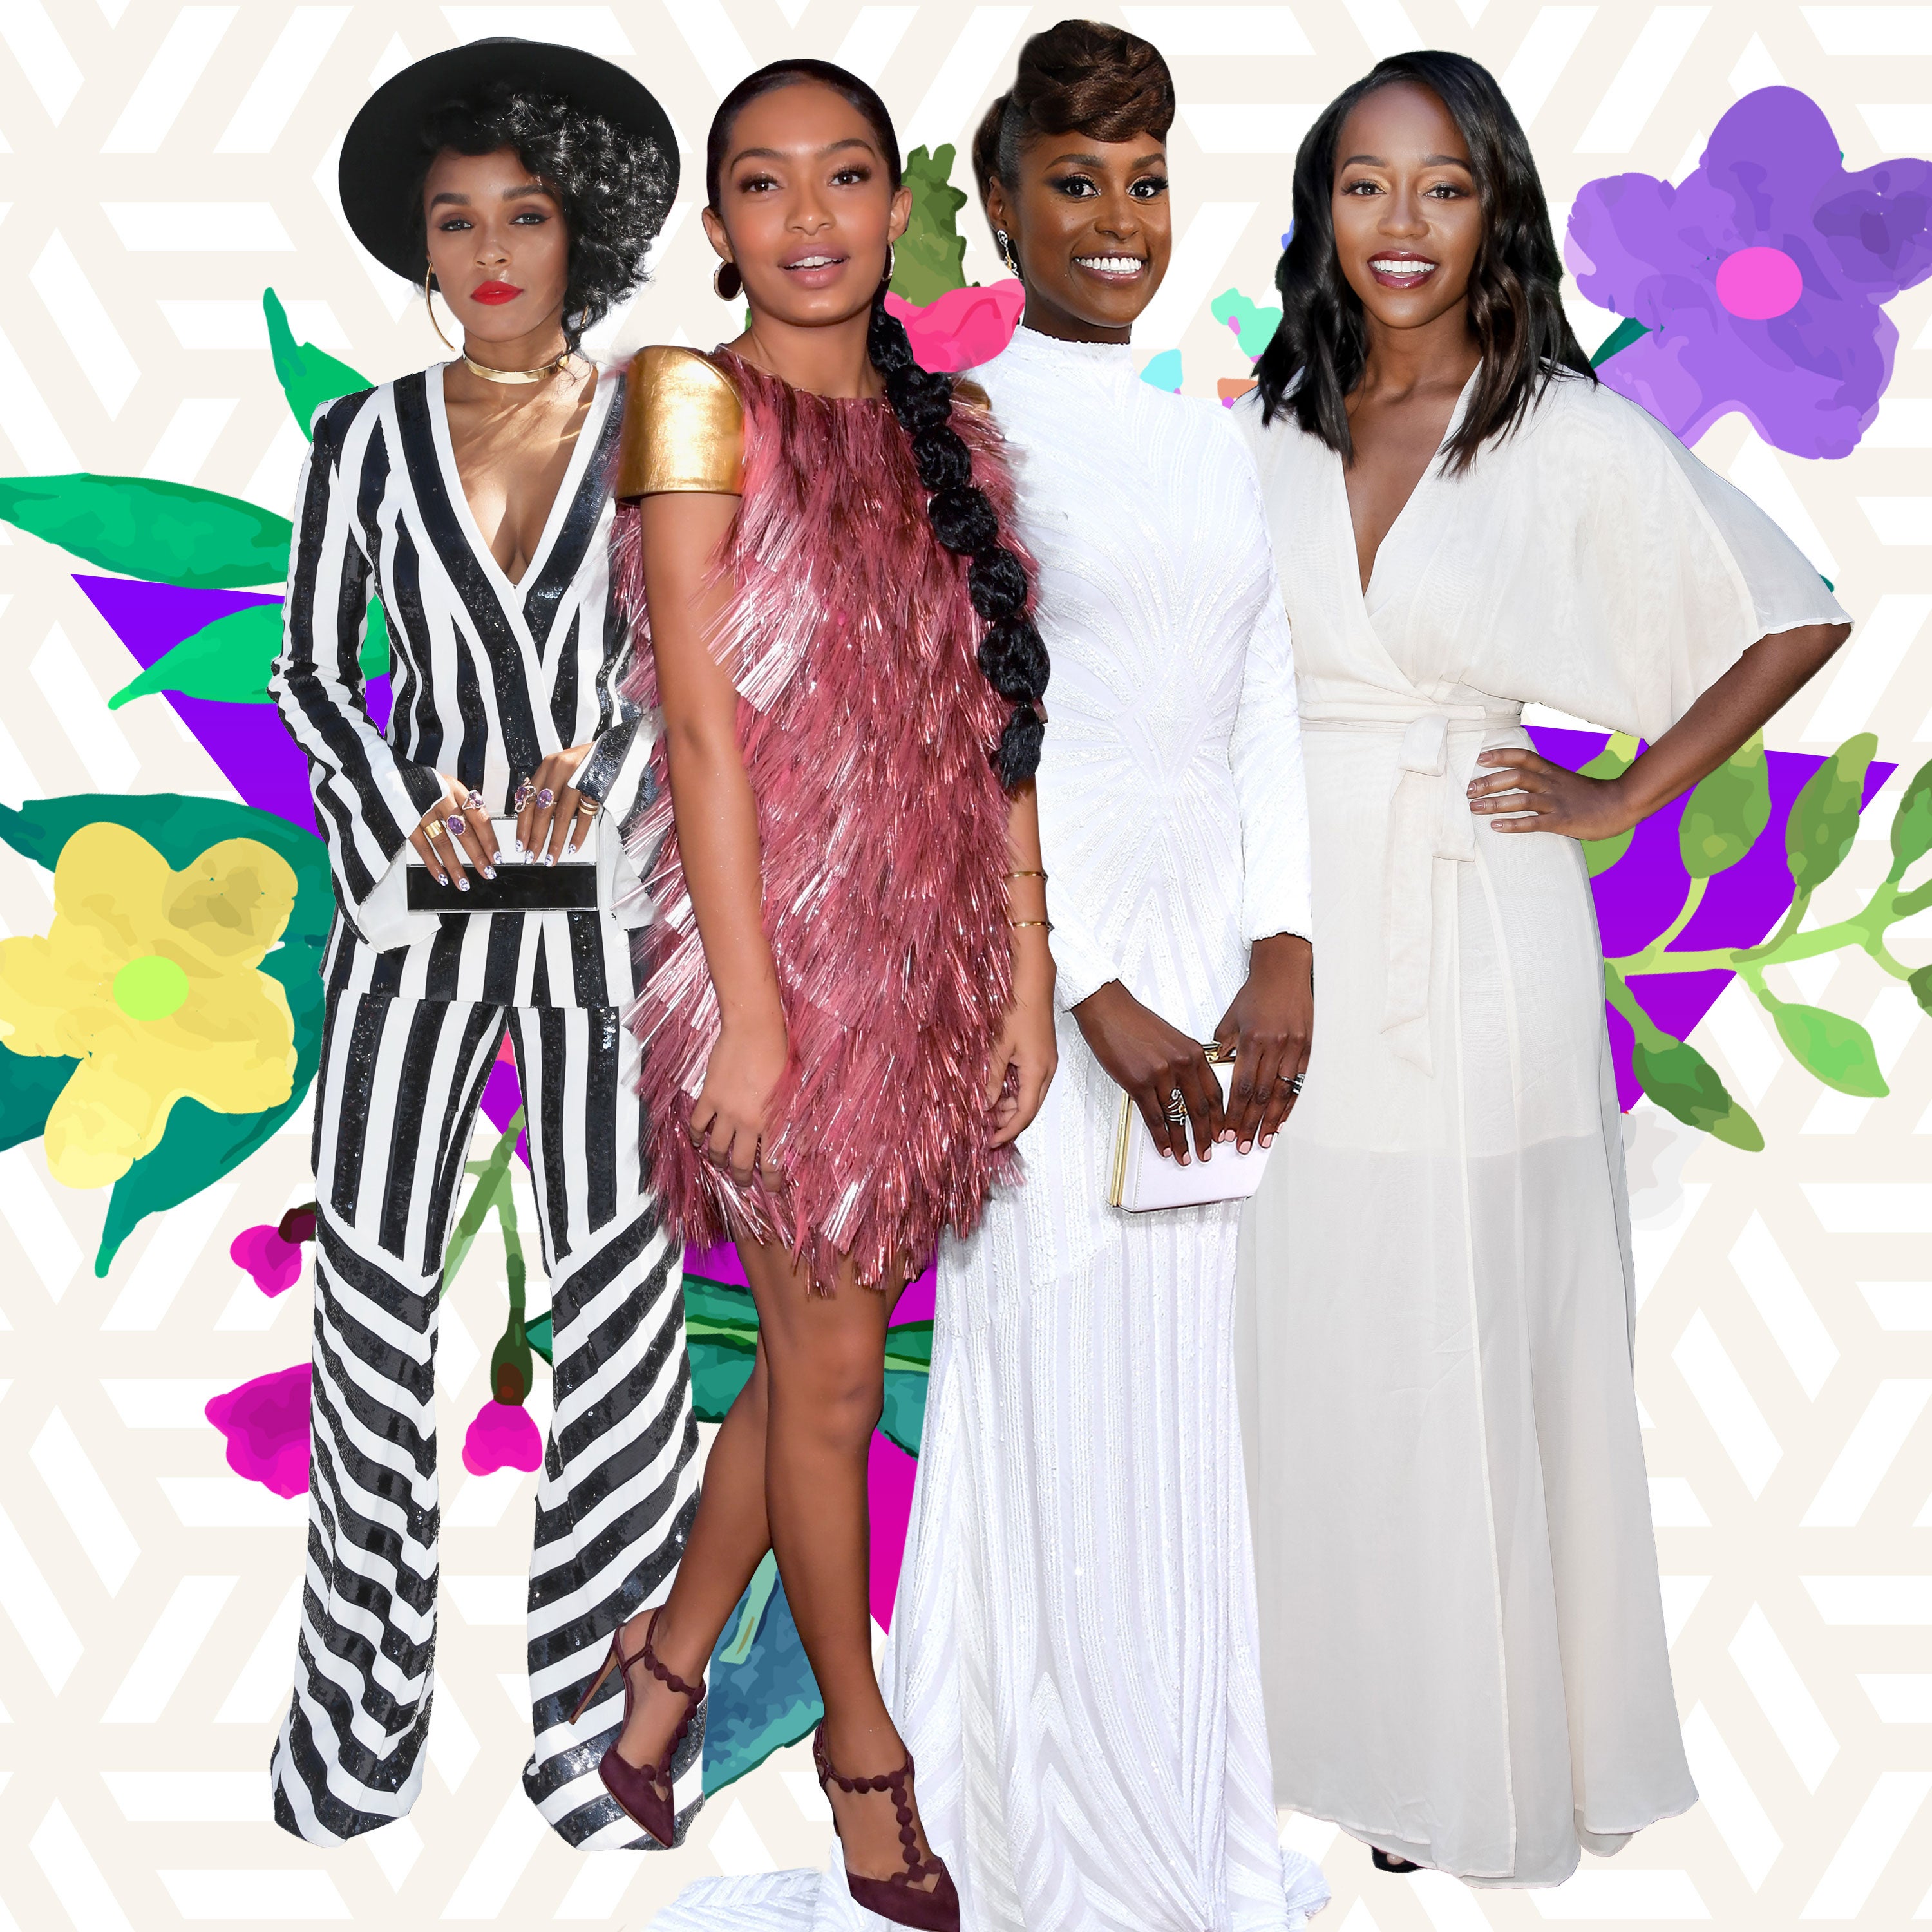 ESSENCE's 10th Annual Black Women in Hollywood Awards To Air On